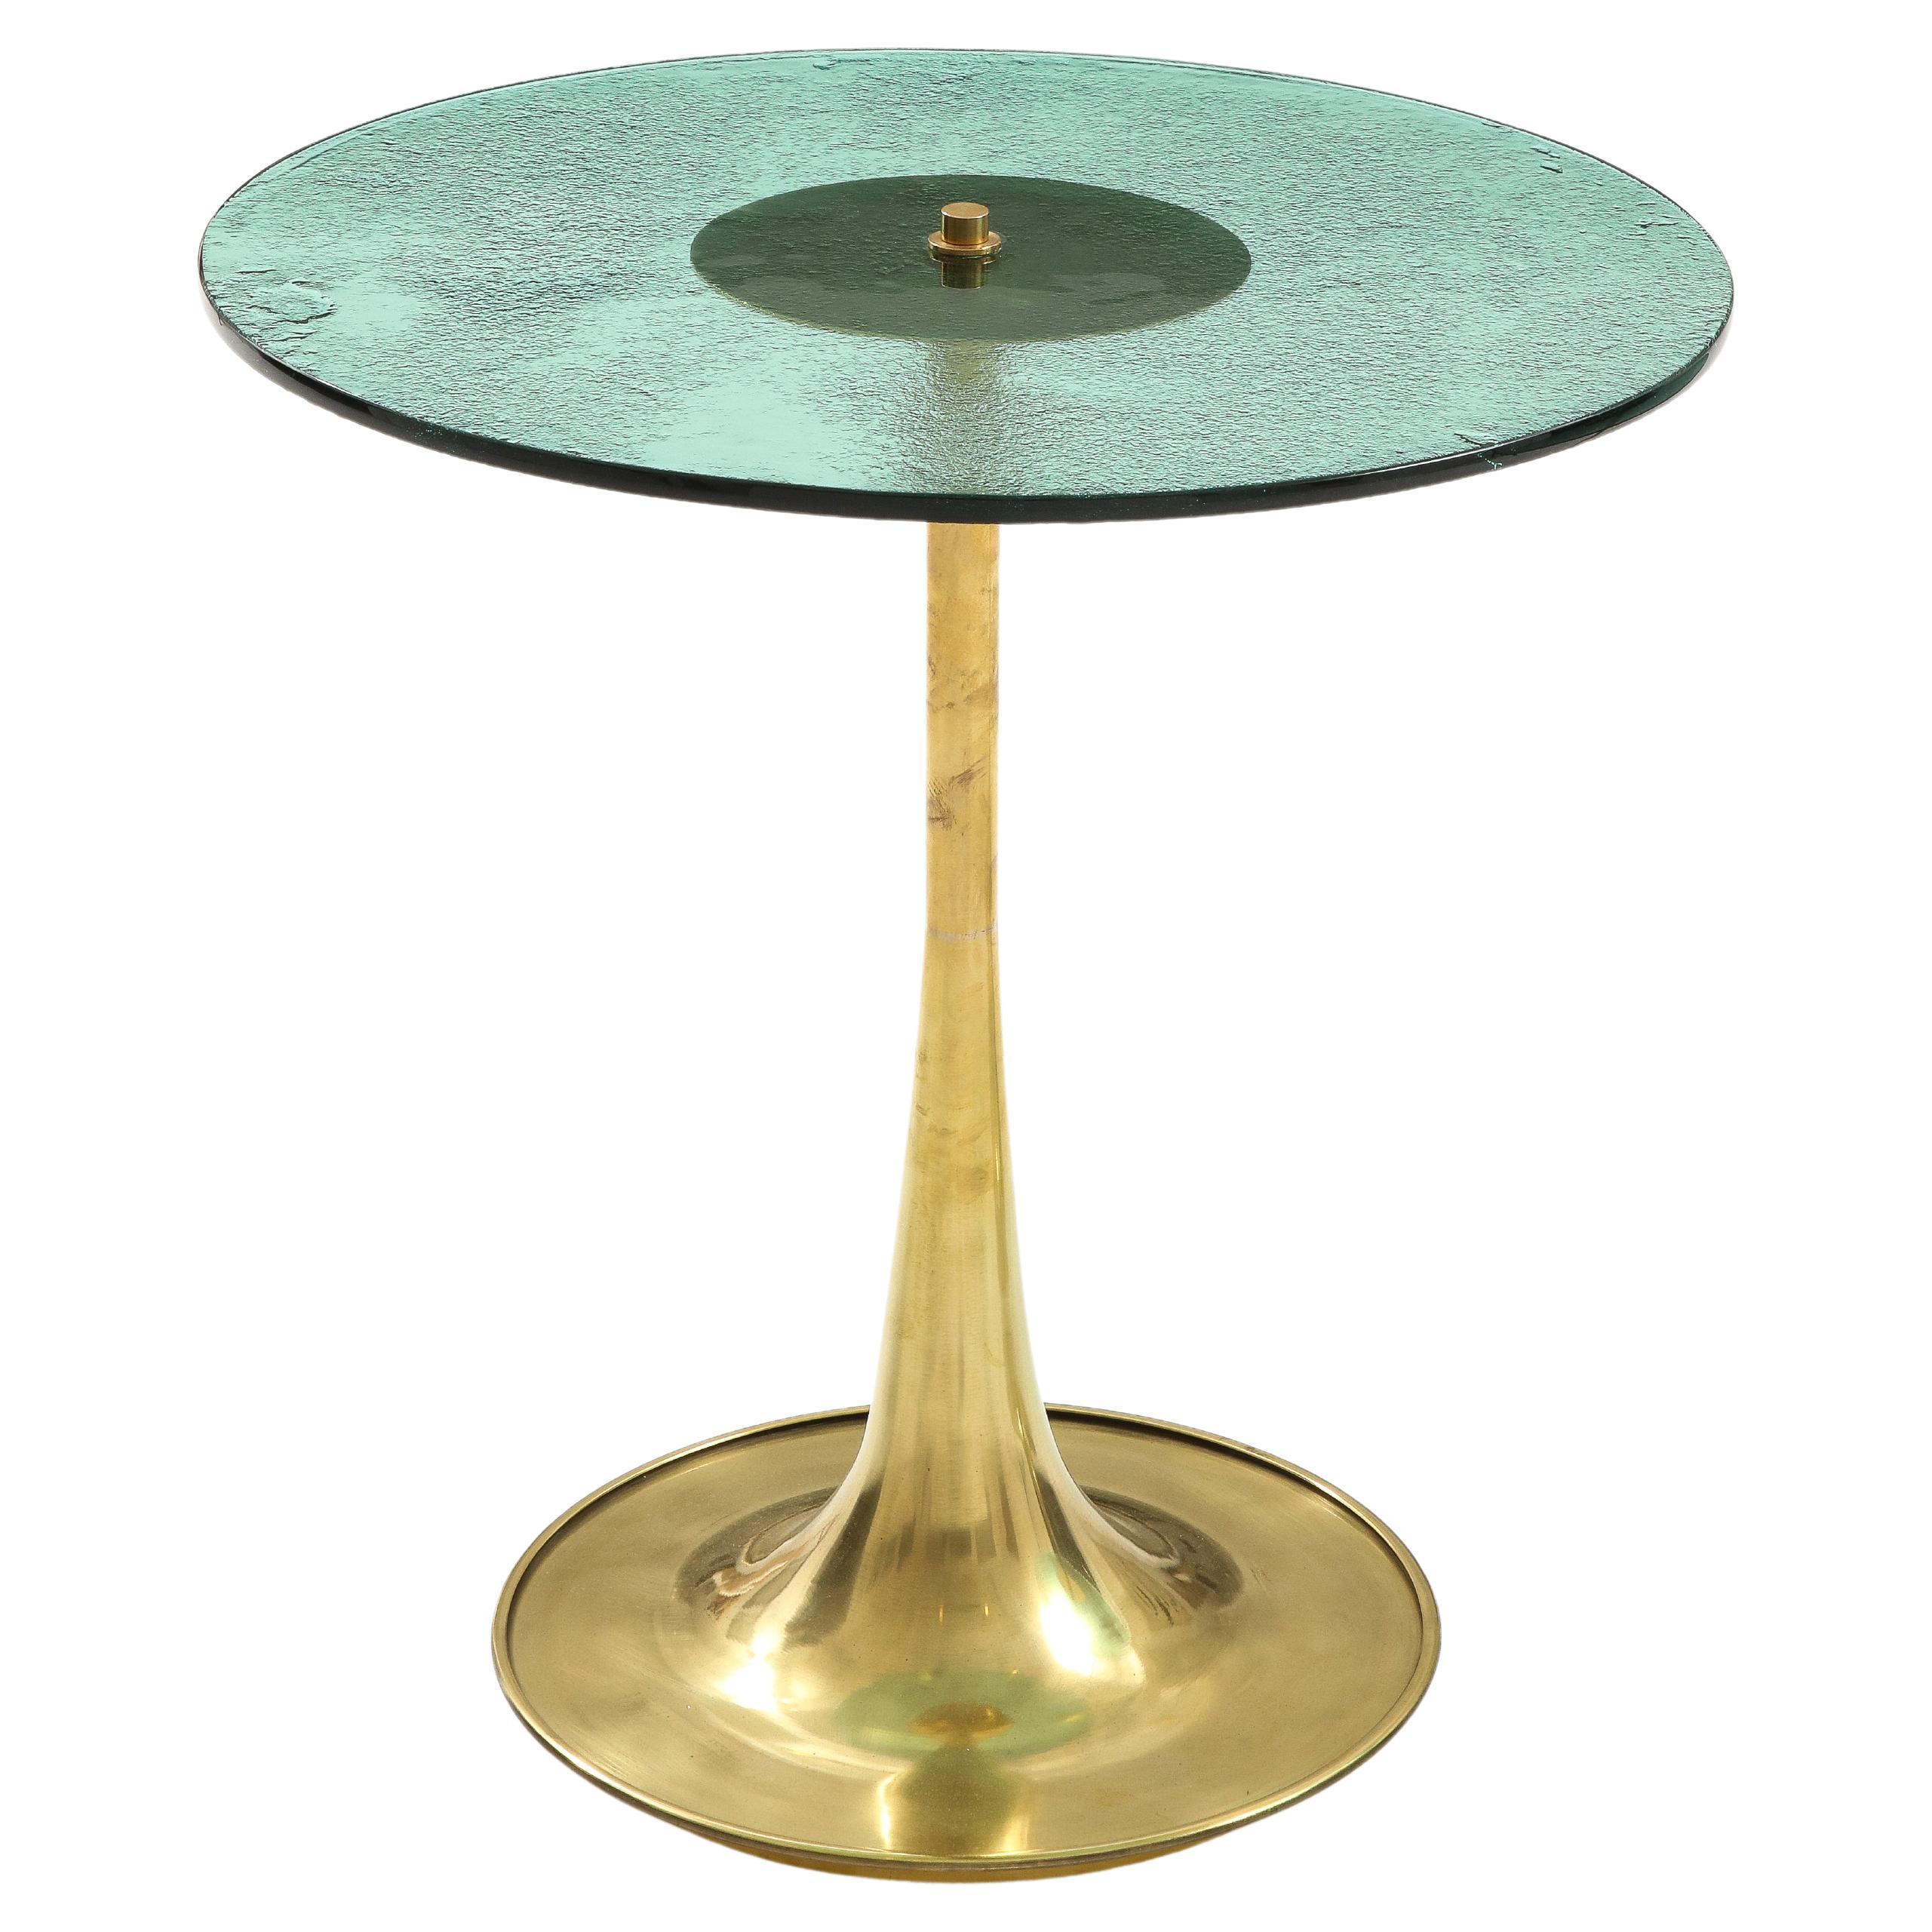 Single Round Soft Green Murano Glass and Brass Martini or Side Table, Italy, 2023. Hand-casted 12 mm Soft Green colored Murano round glass top sits atop a hand-turned, trumpet-shaped brass base. The glass top is smooth and flat on one side and